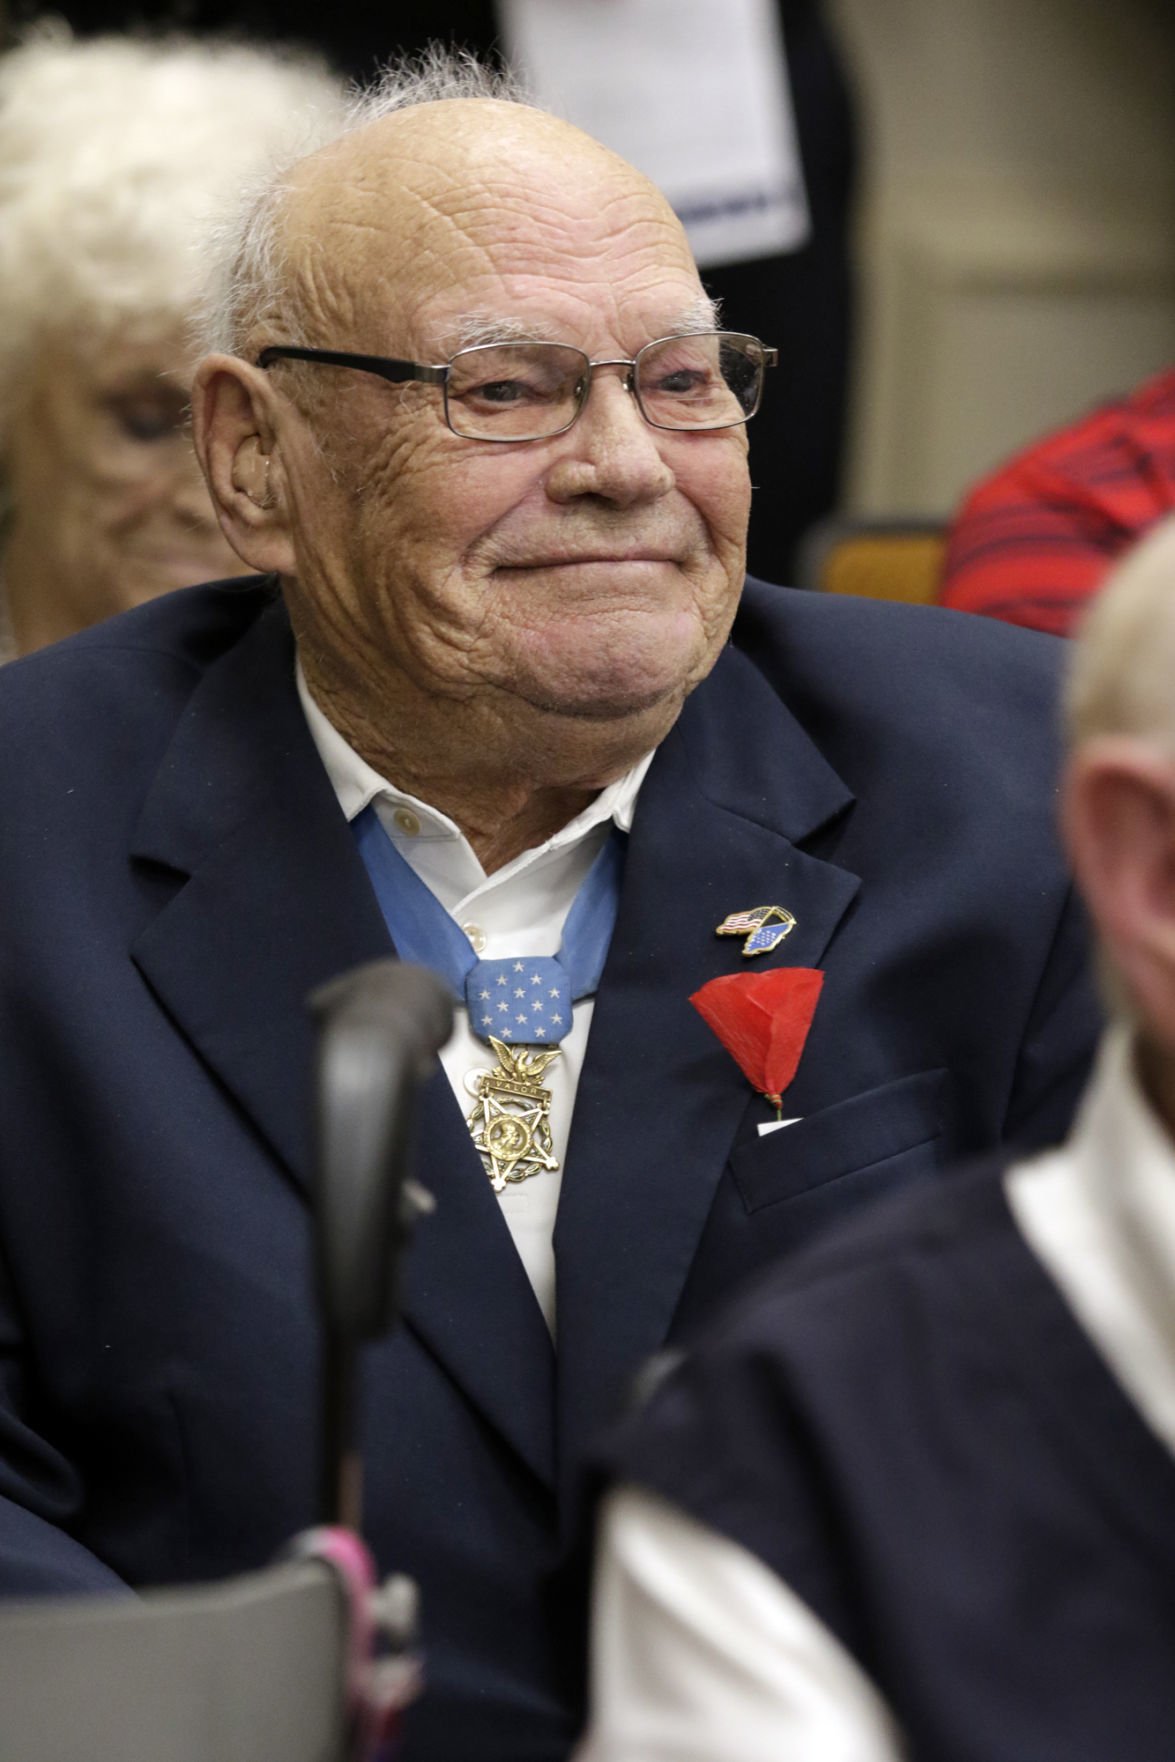 do medal of honor recipients have to retire